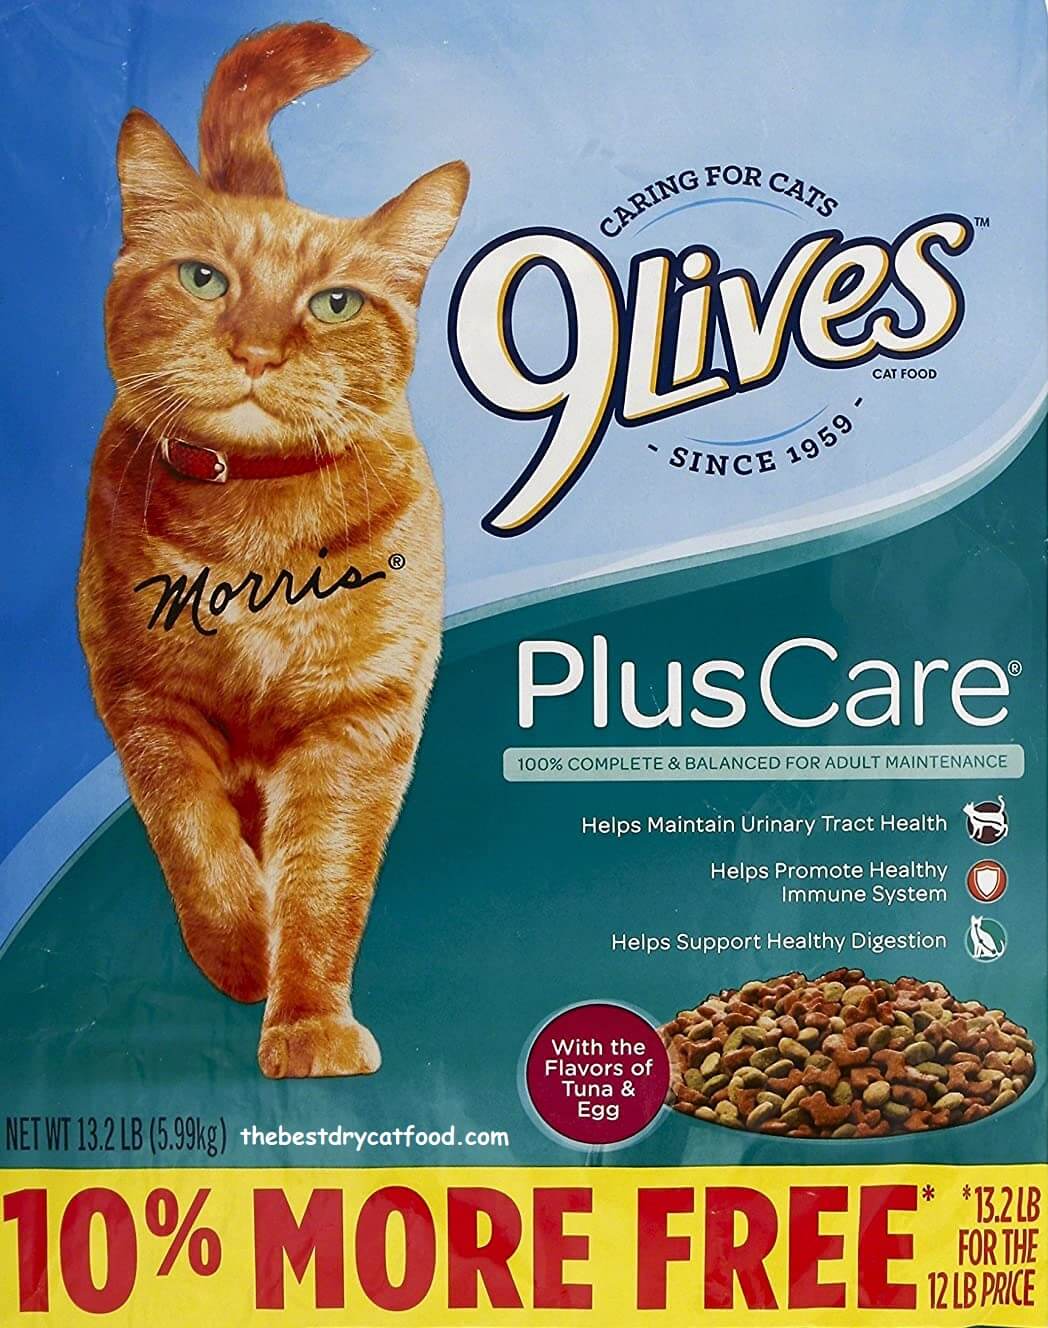 Best Dry Cat Food For Urinary Tract Health Reviews & Buyer Guide